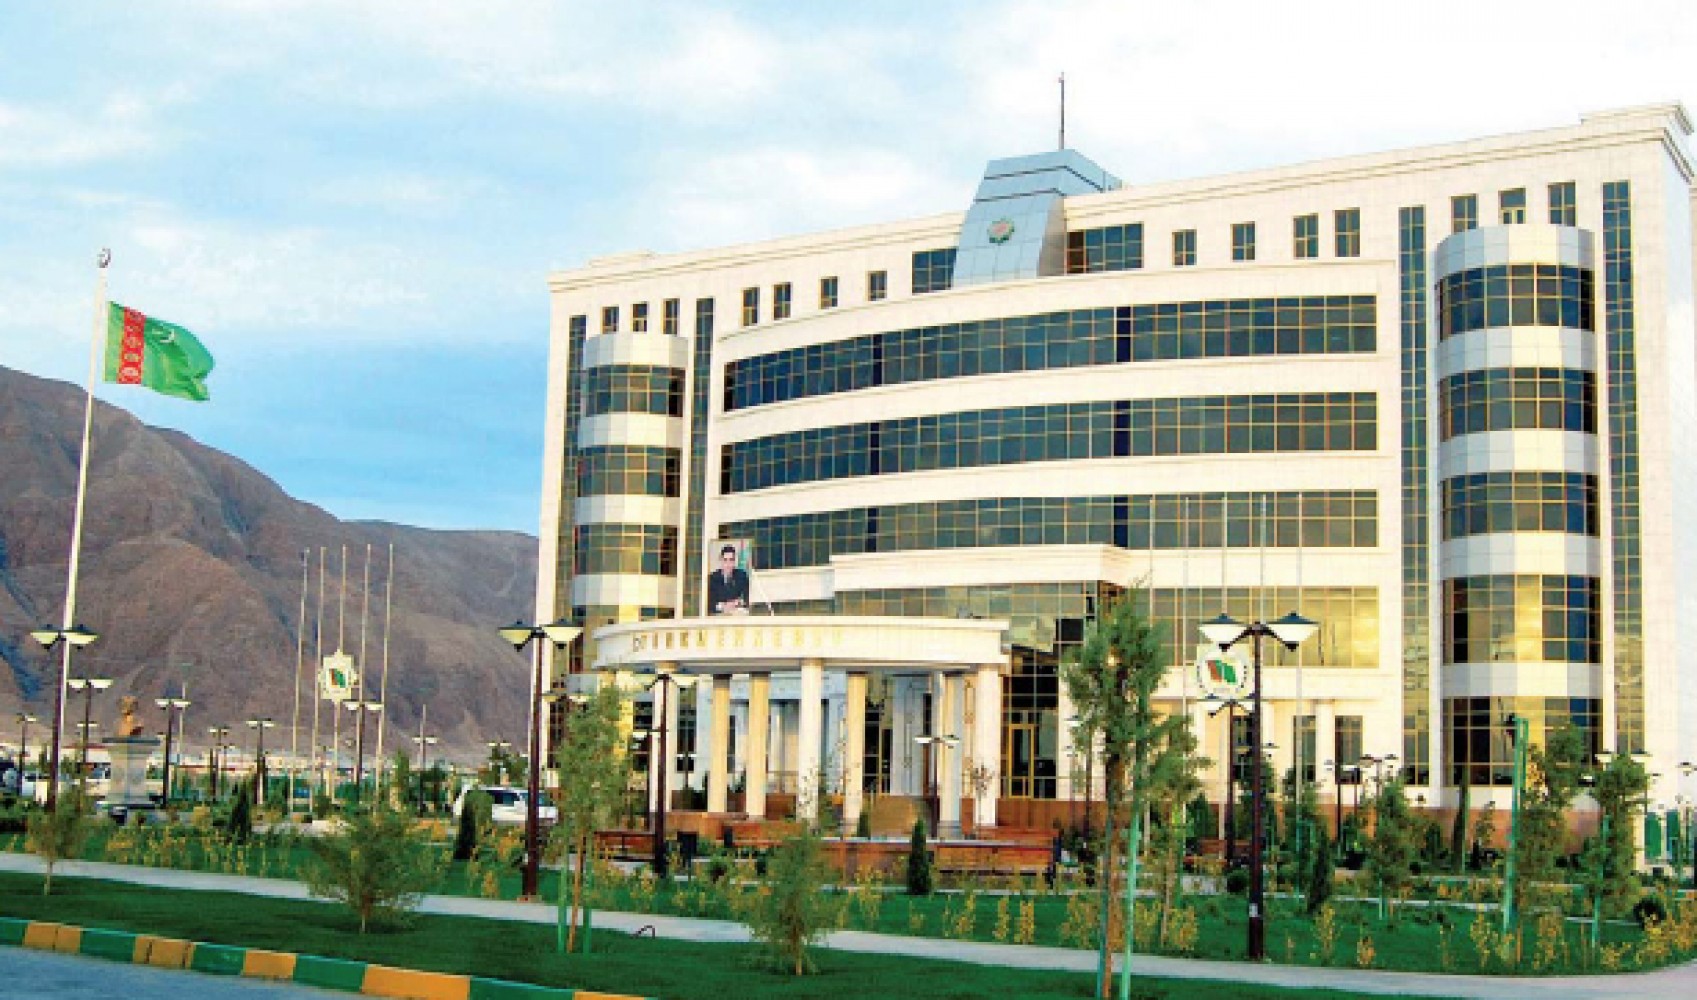 Administrative Building of Turkmenistan Ministry of Oil